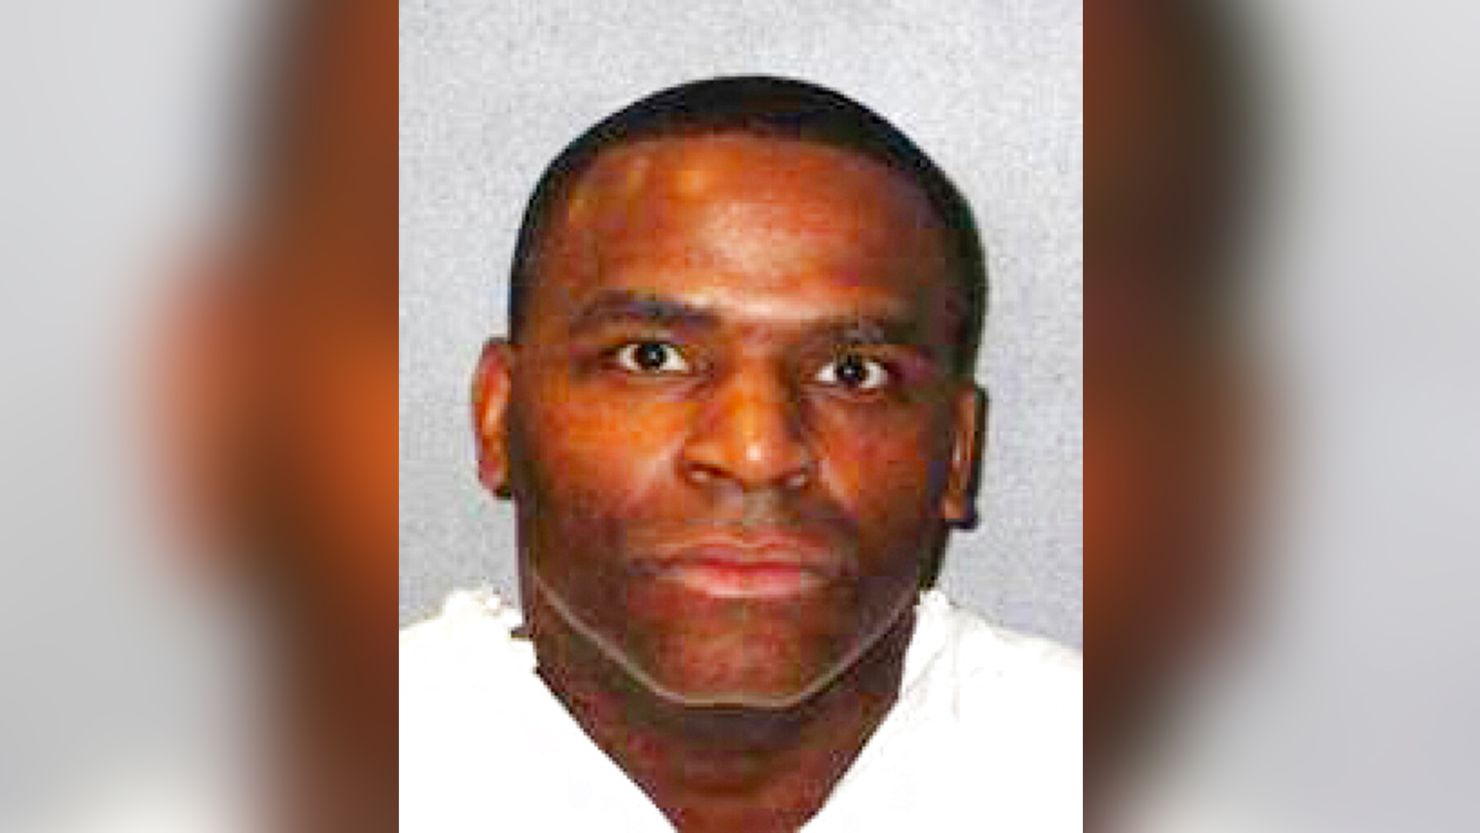 Quintin Jones Texas Executes Inmate For The First Time In Nearly A